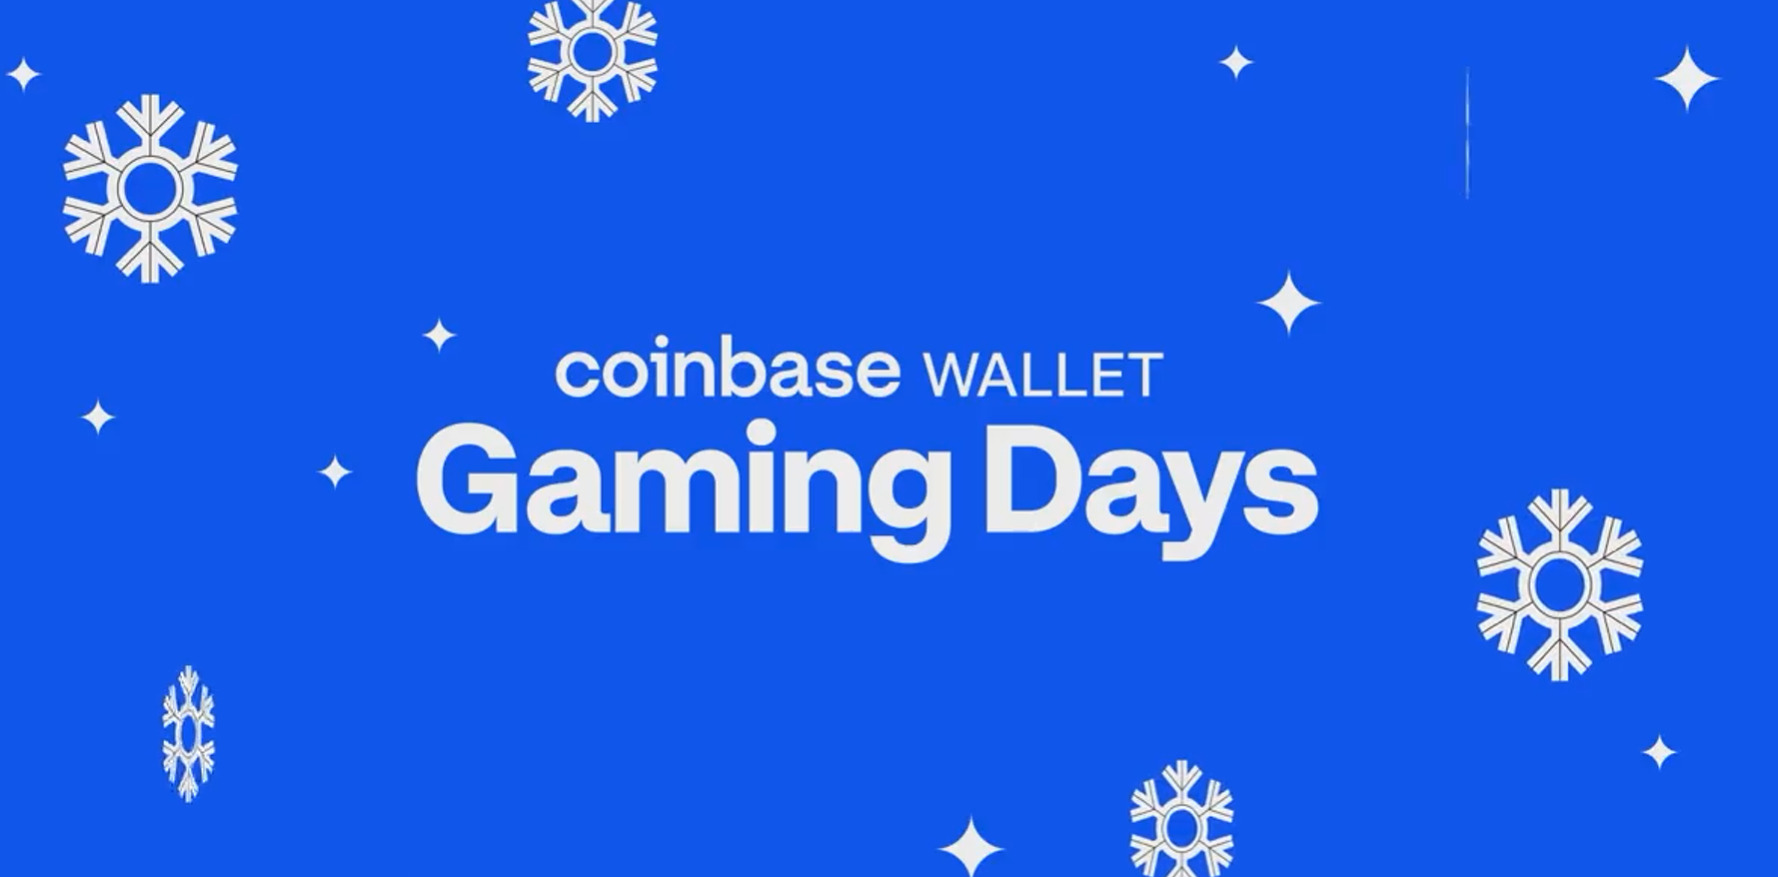 Play and Earn with Coinbase Wallet Gaming Days